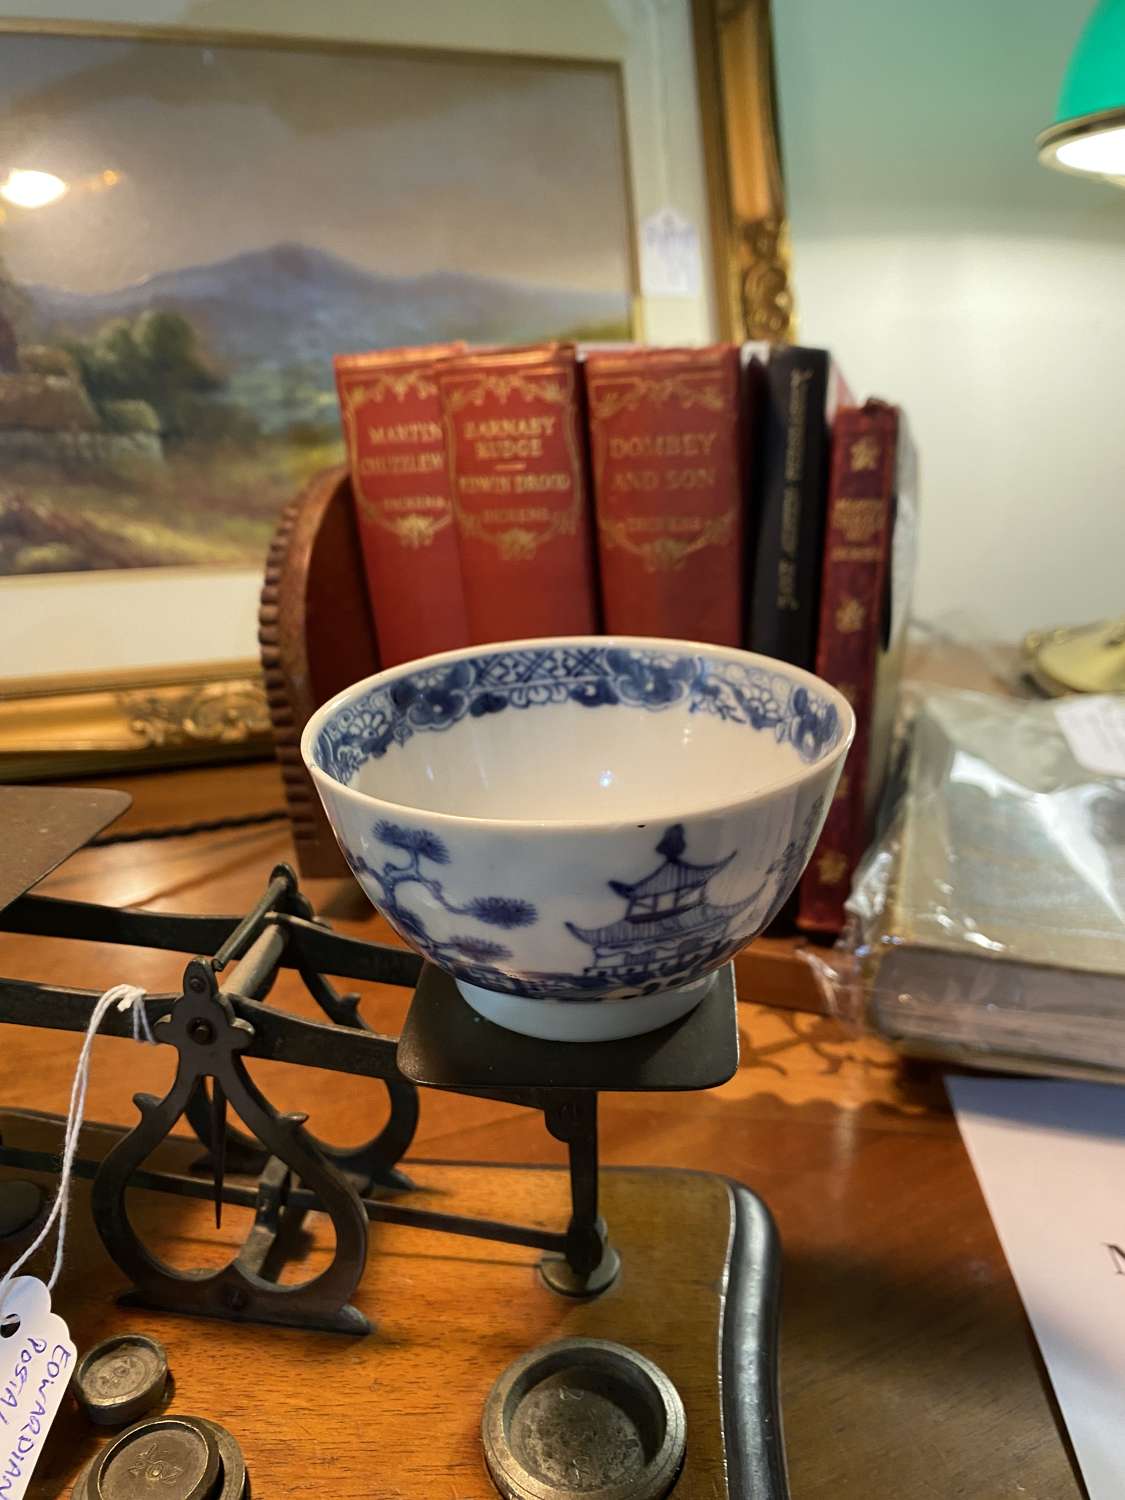 Late 18th Century Chinese Porcelain Tea Bowl